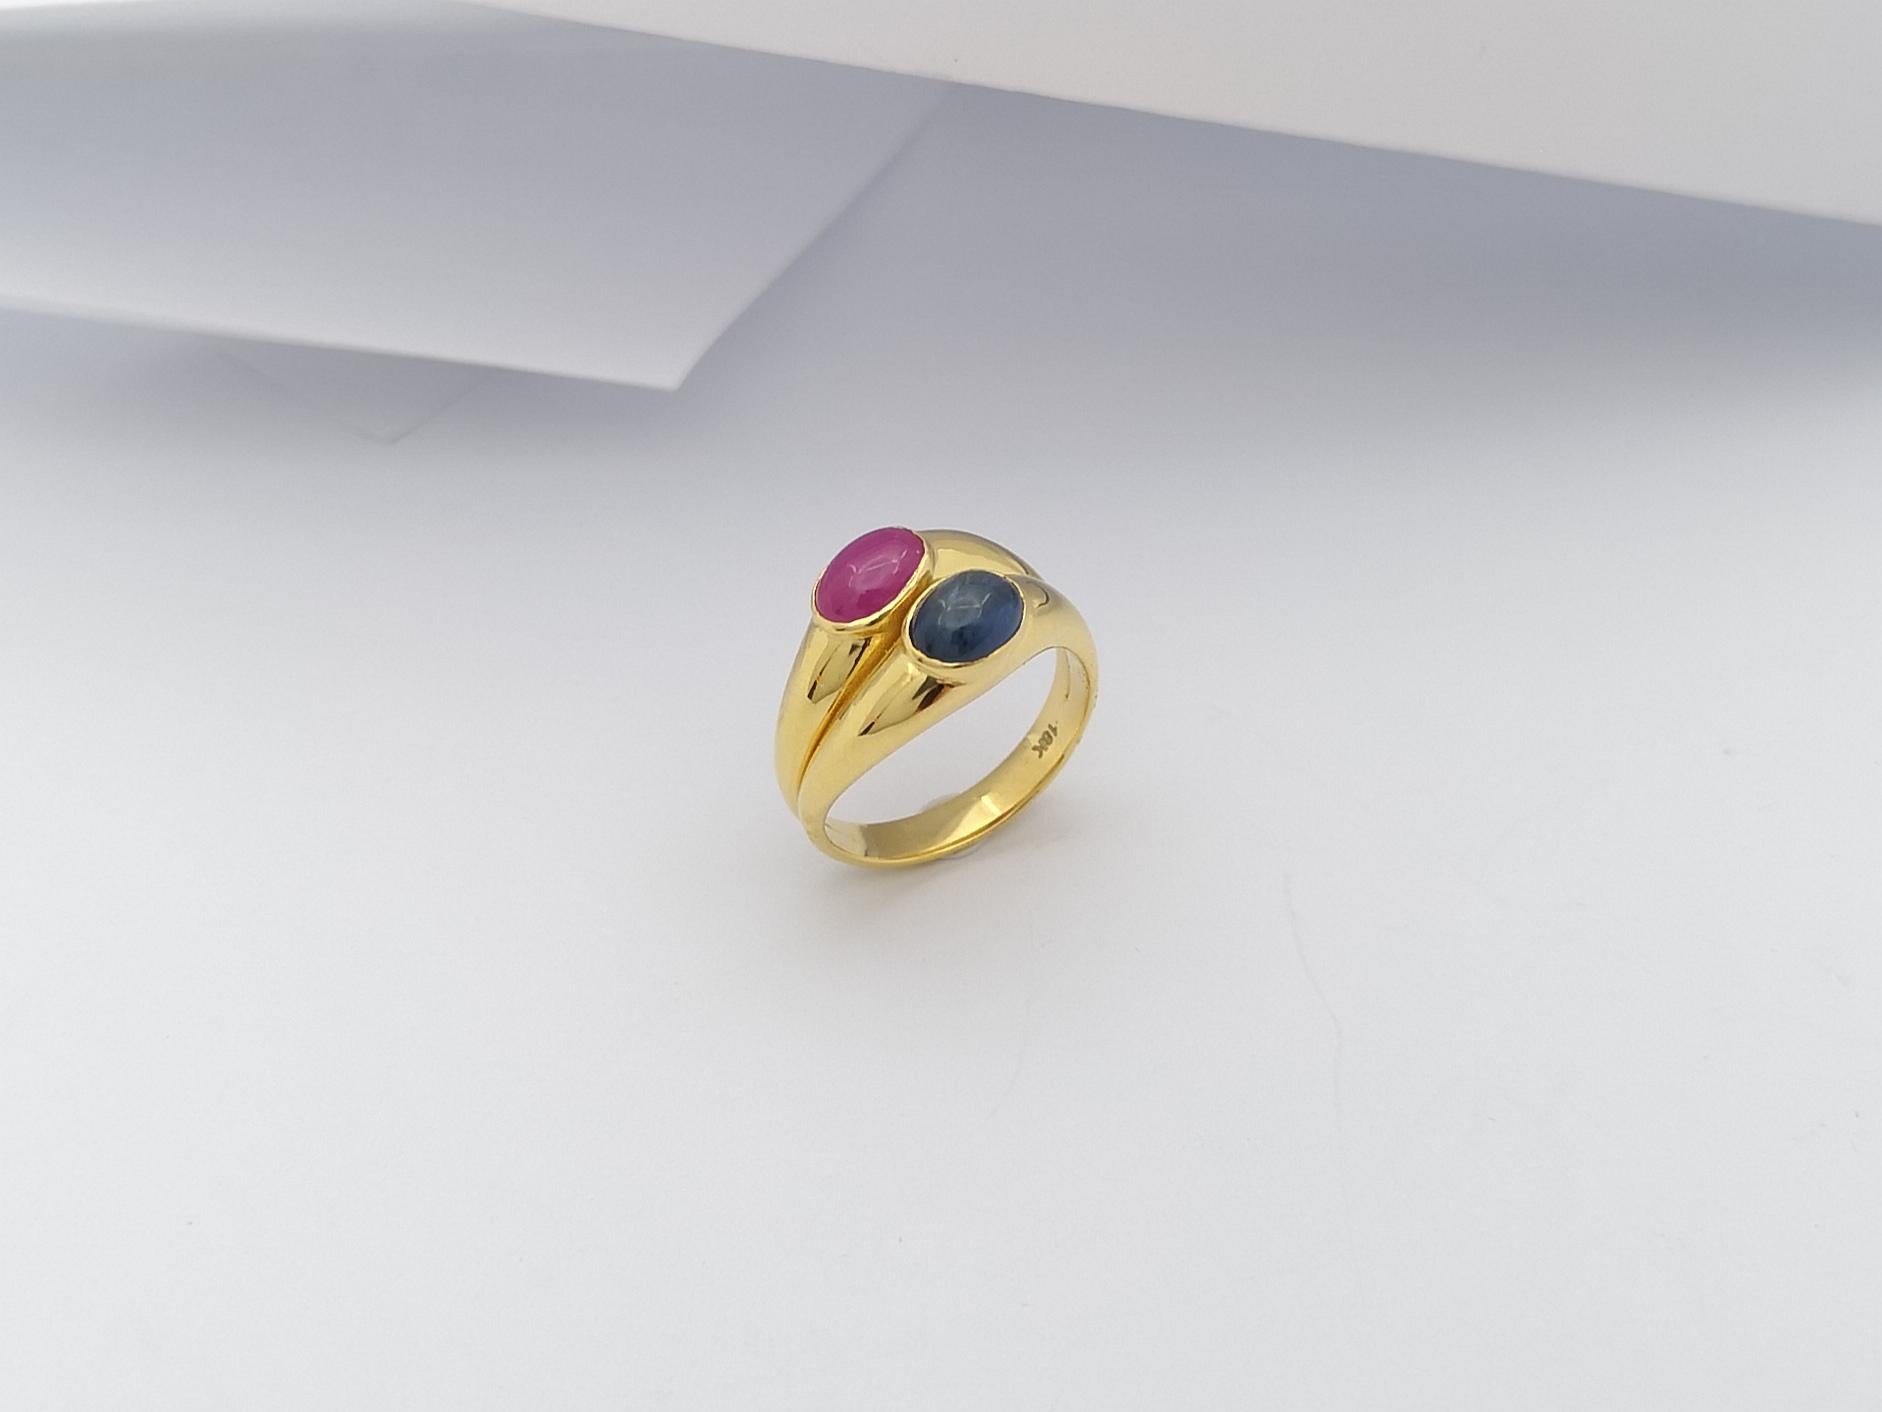 Cabochon Ruby and Cabochon Blue Sapphire Ring Set in 18 Karat Gold Settings For Sale 6